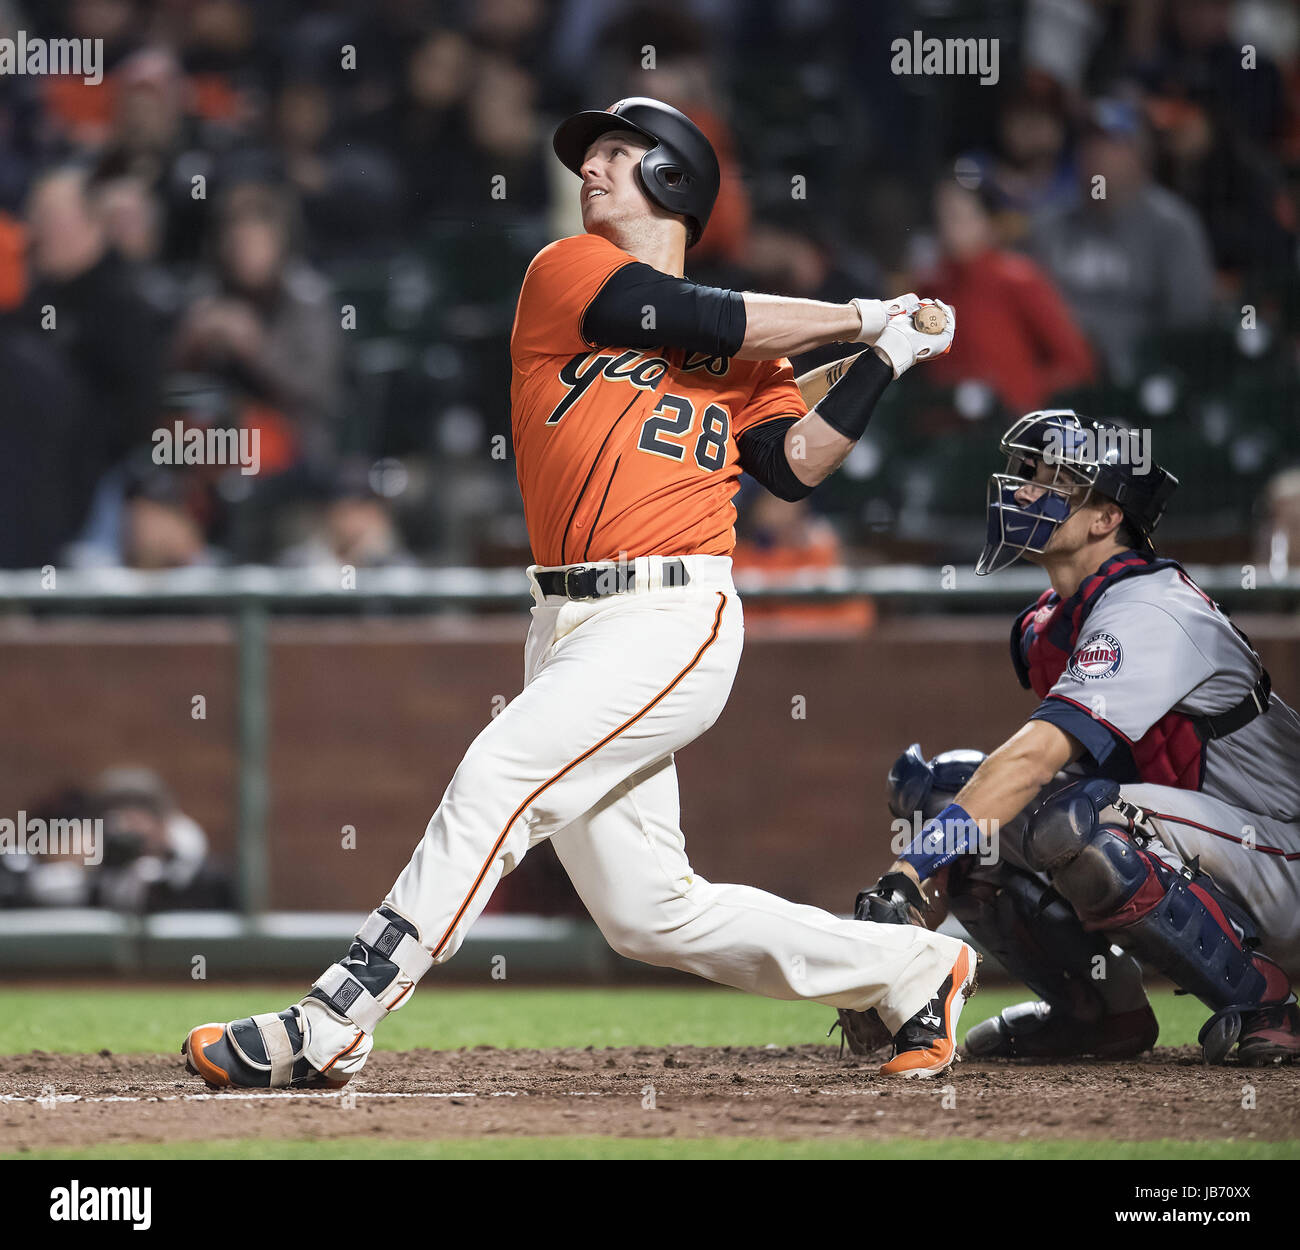 San Francisco, California, USA. 09th June, 2017. San Francisco Giants catcher Buster Posey (28) watches a high fly during the bottom of the seventh inning of a MLB baseball game between the Minnesota Twins and the San Francisco Giants on Portuguese Heritage Night at AT&T Park in San Francisco, California. Valerie Shoaps/CSM/Alamy Live News Stock Photo